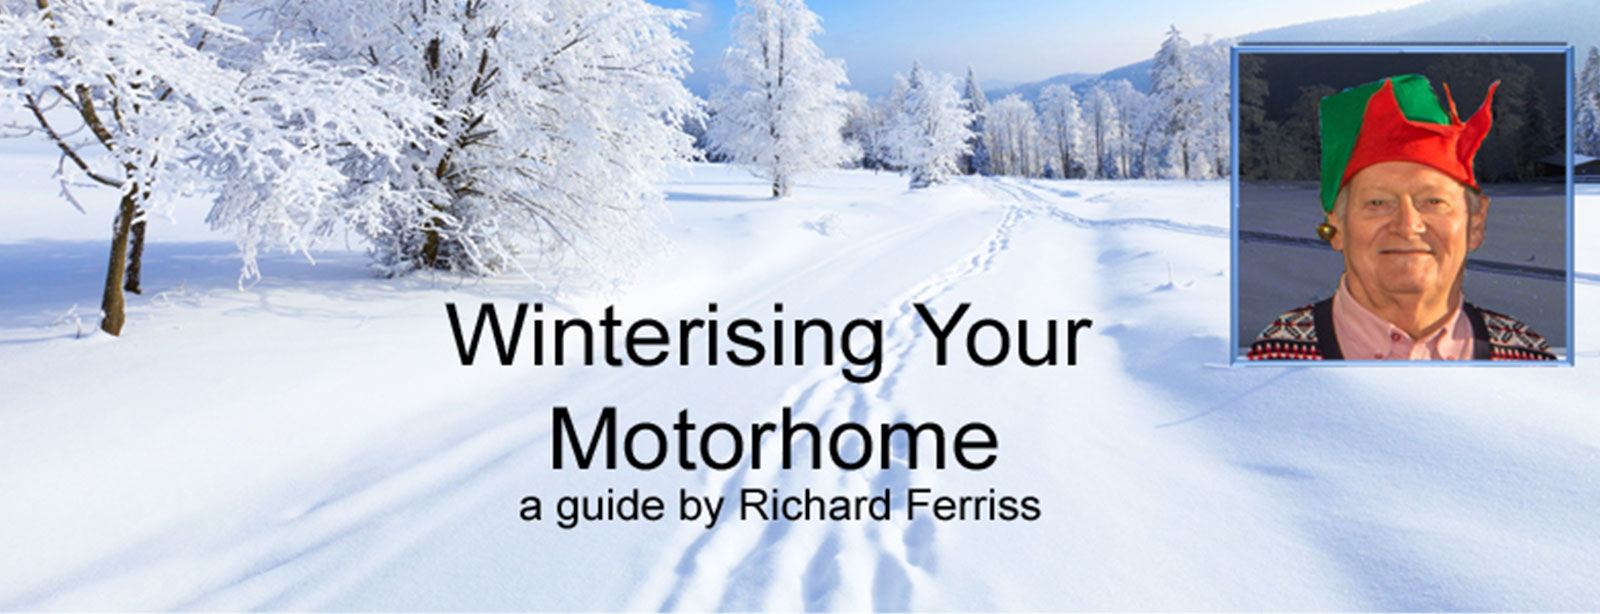 Steps on how to winterize your motorhome or campervan